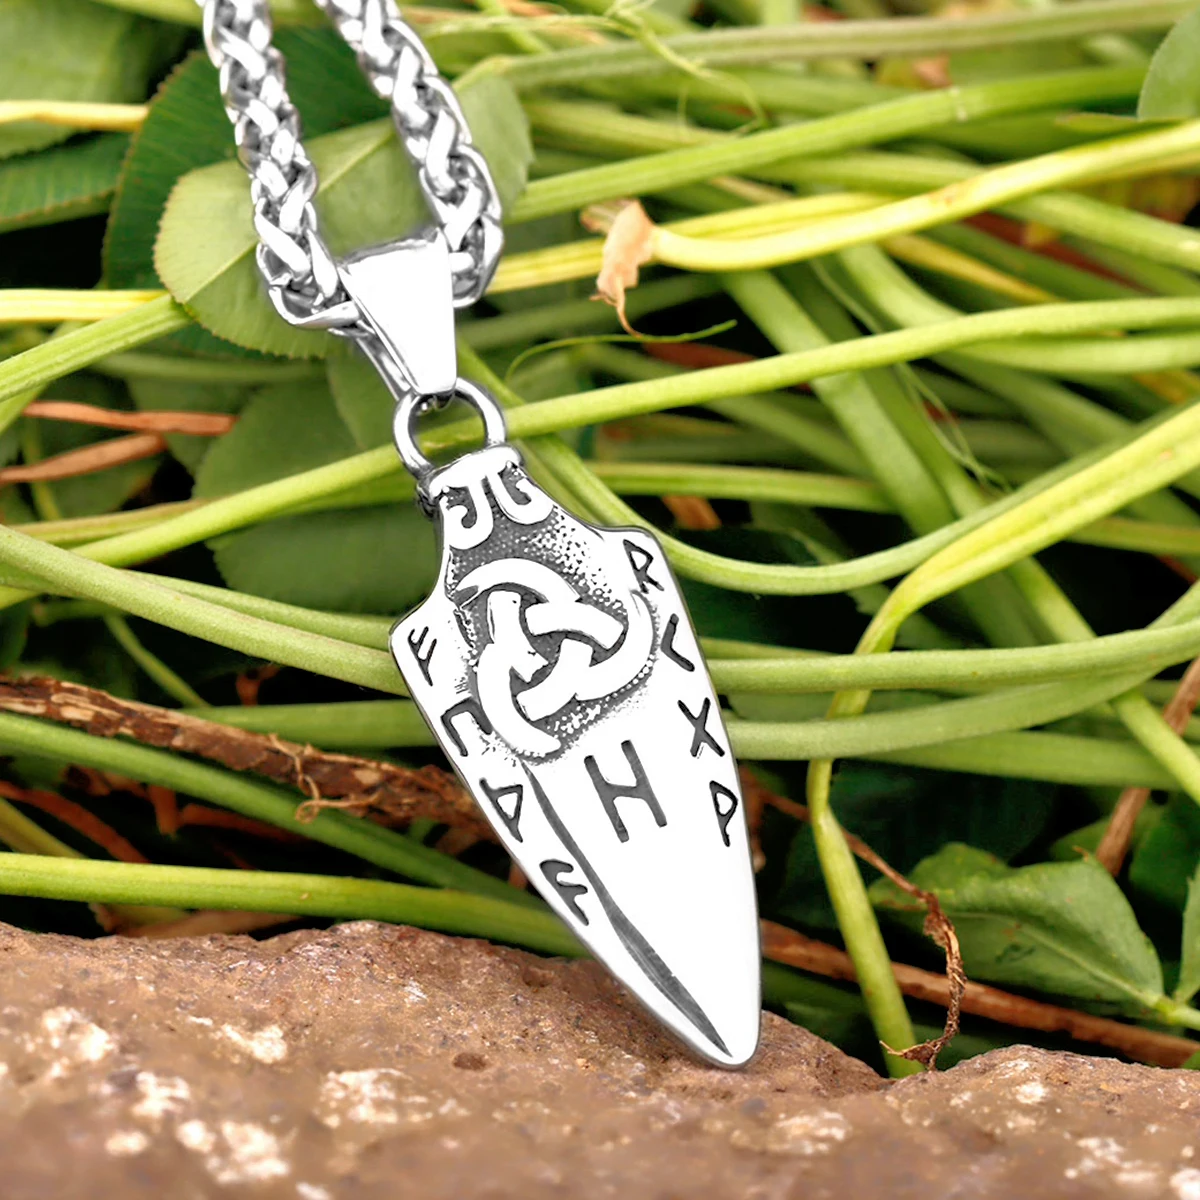 

Nordic Viking Rune Arrow Necklace Men's Stainless Steel Valknut Celtic Knot Amulet Pendant Necklace Fashion Vintage Jewelry Gift